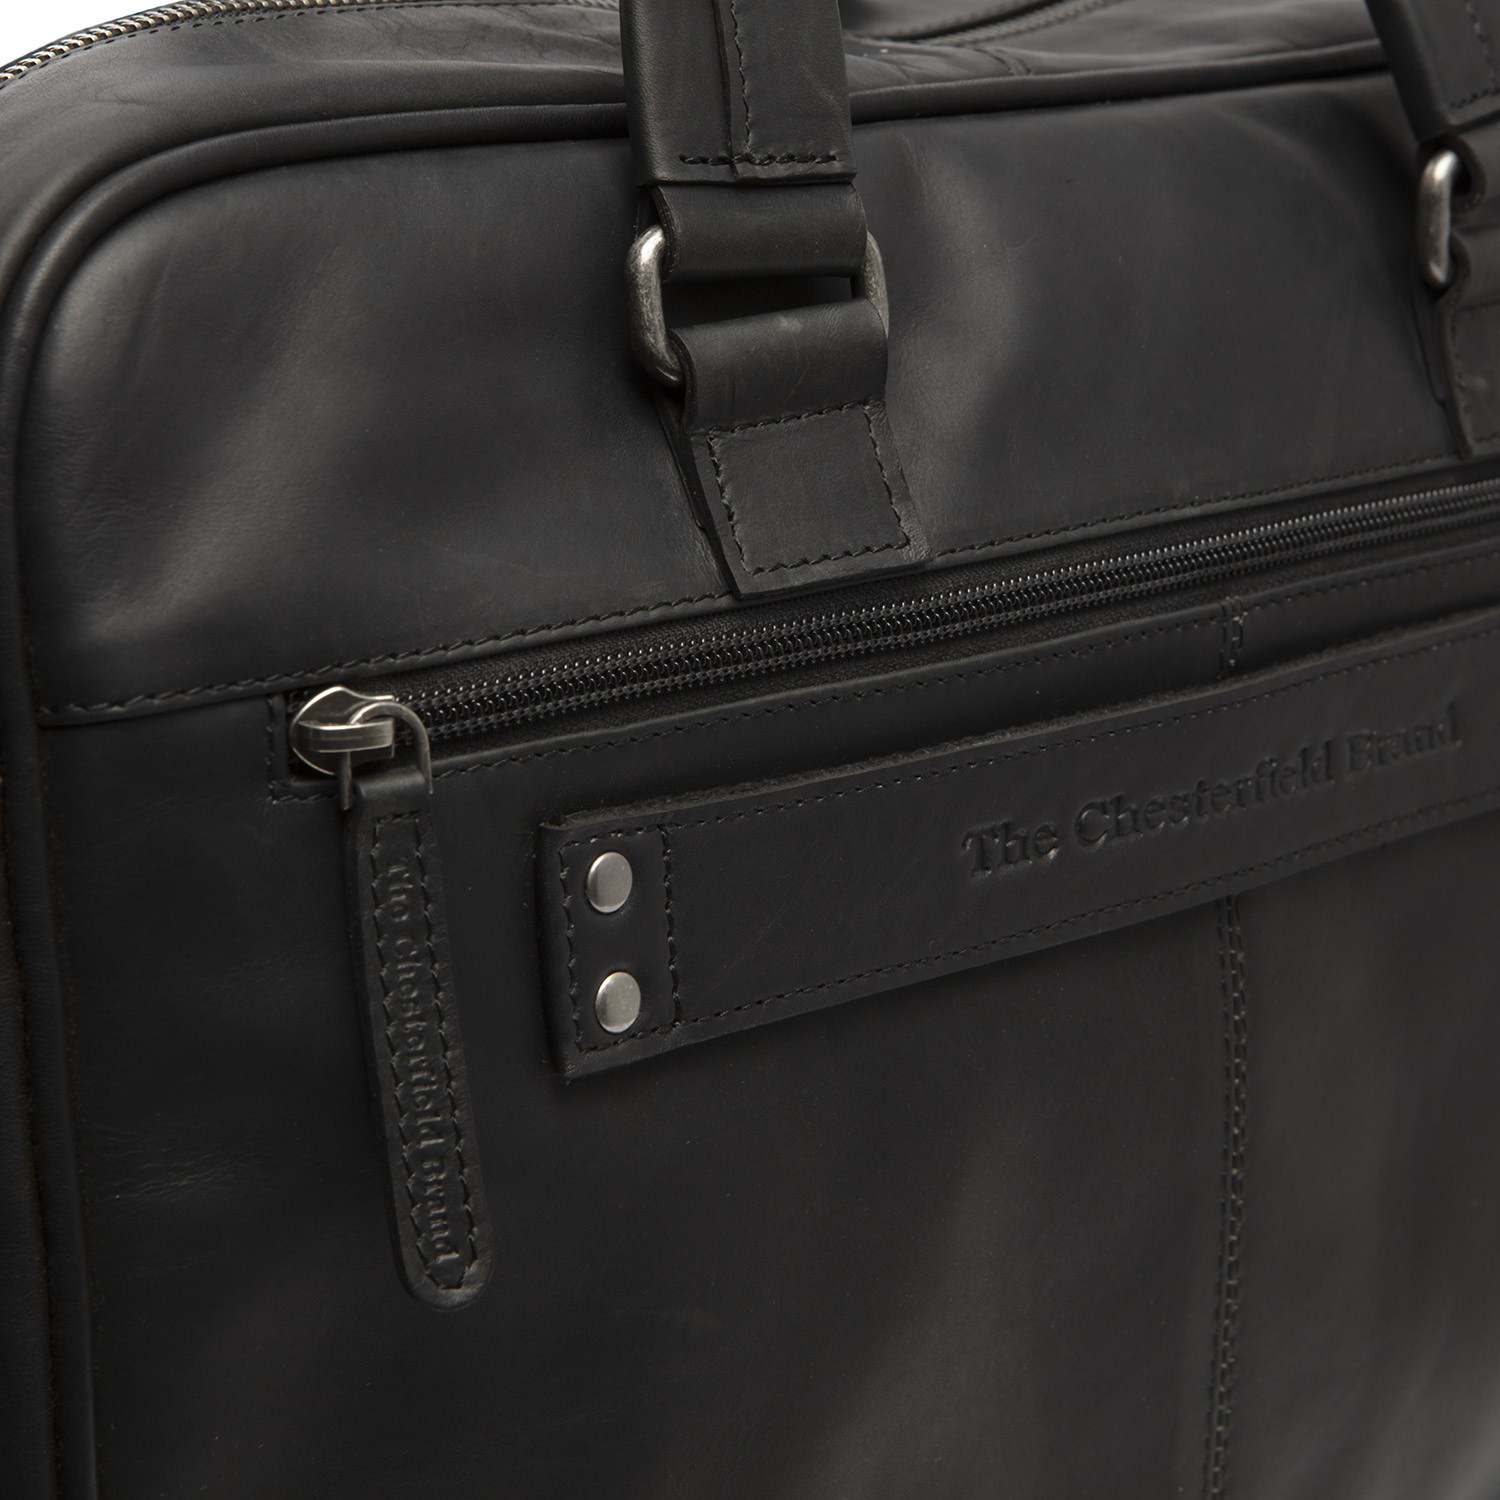 Leather Laptop Bag Black Singapore - The Chesterfield Brand